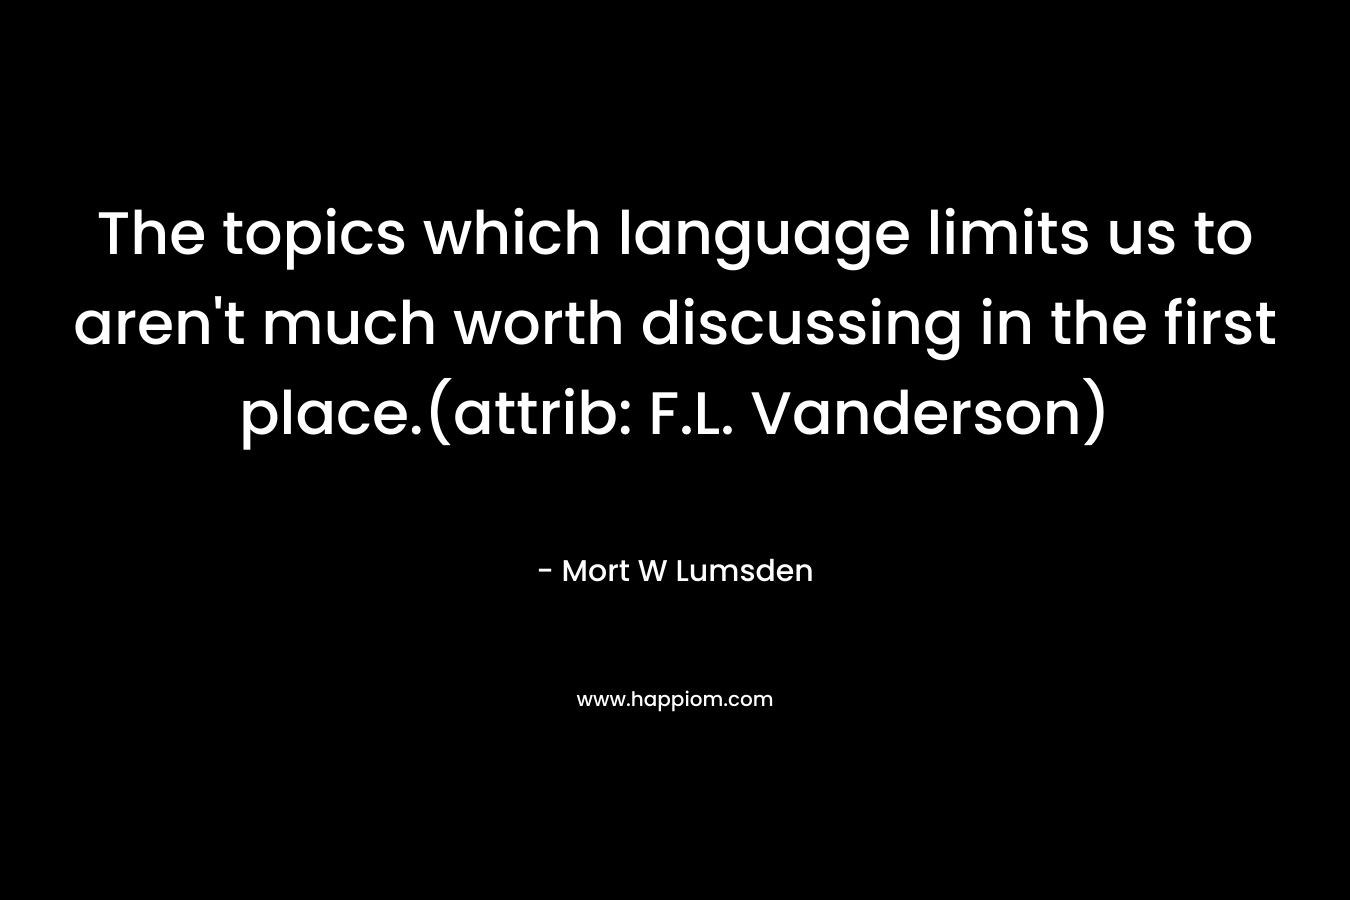 The topics which language limits us to aren’t much worth discussing in the first place.(attrib: F.L. Vanderson) – Mort W Lumsden